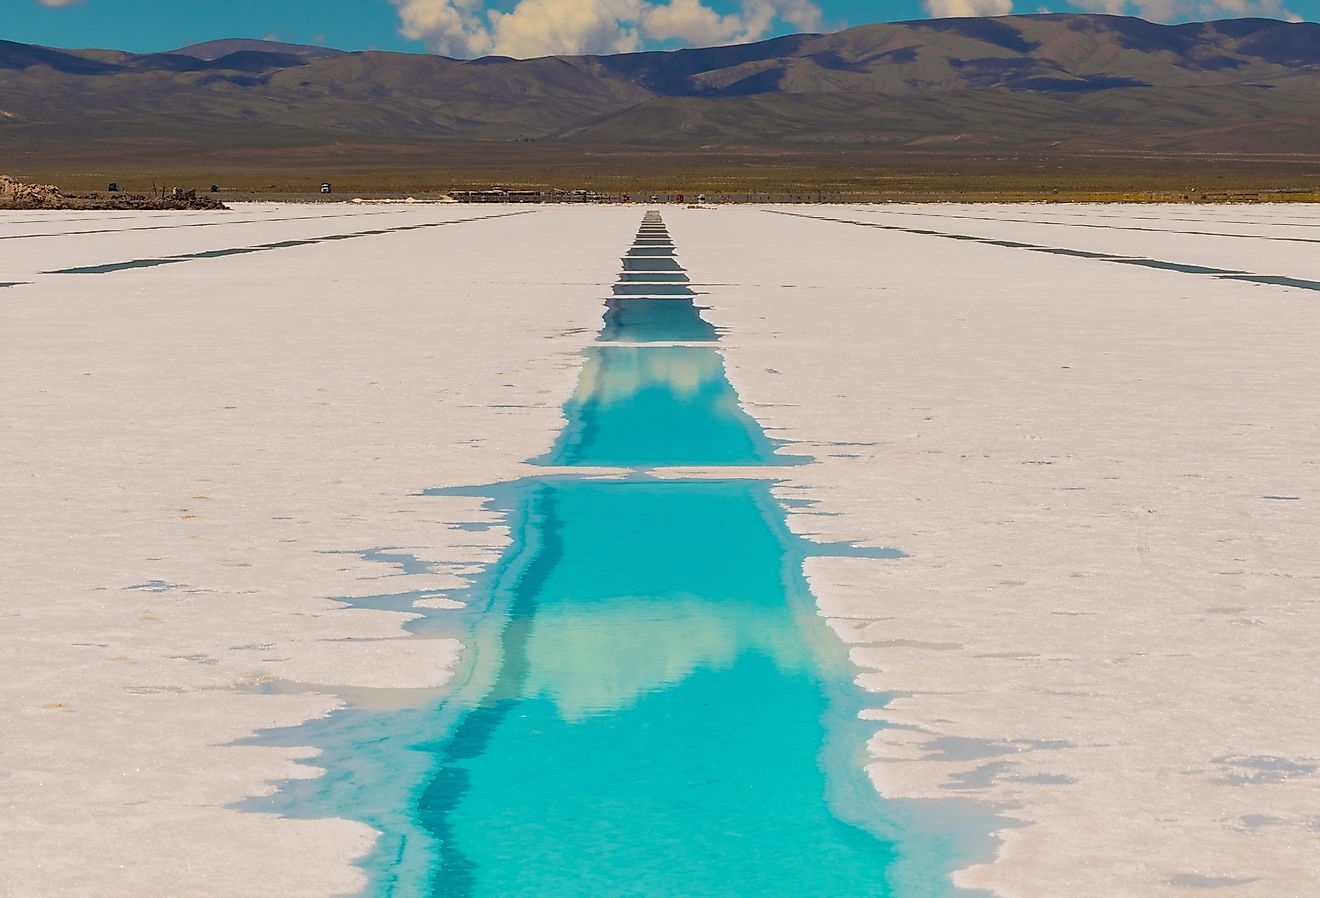 Pools for the extraction of lithium in Salinas Grandes, Jujuy, Argentina.